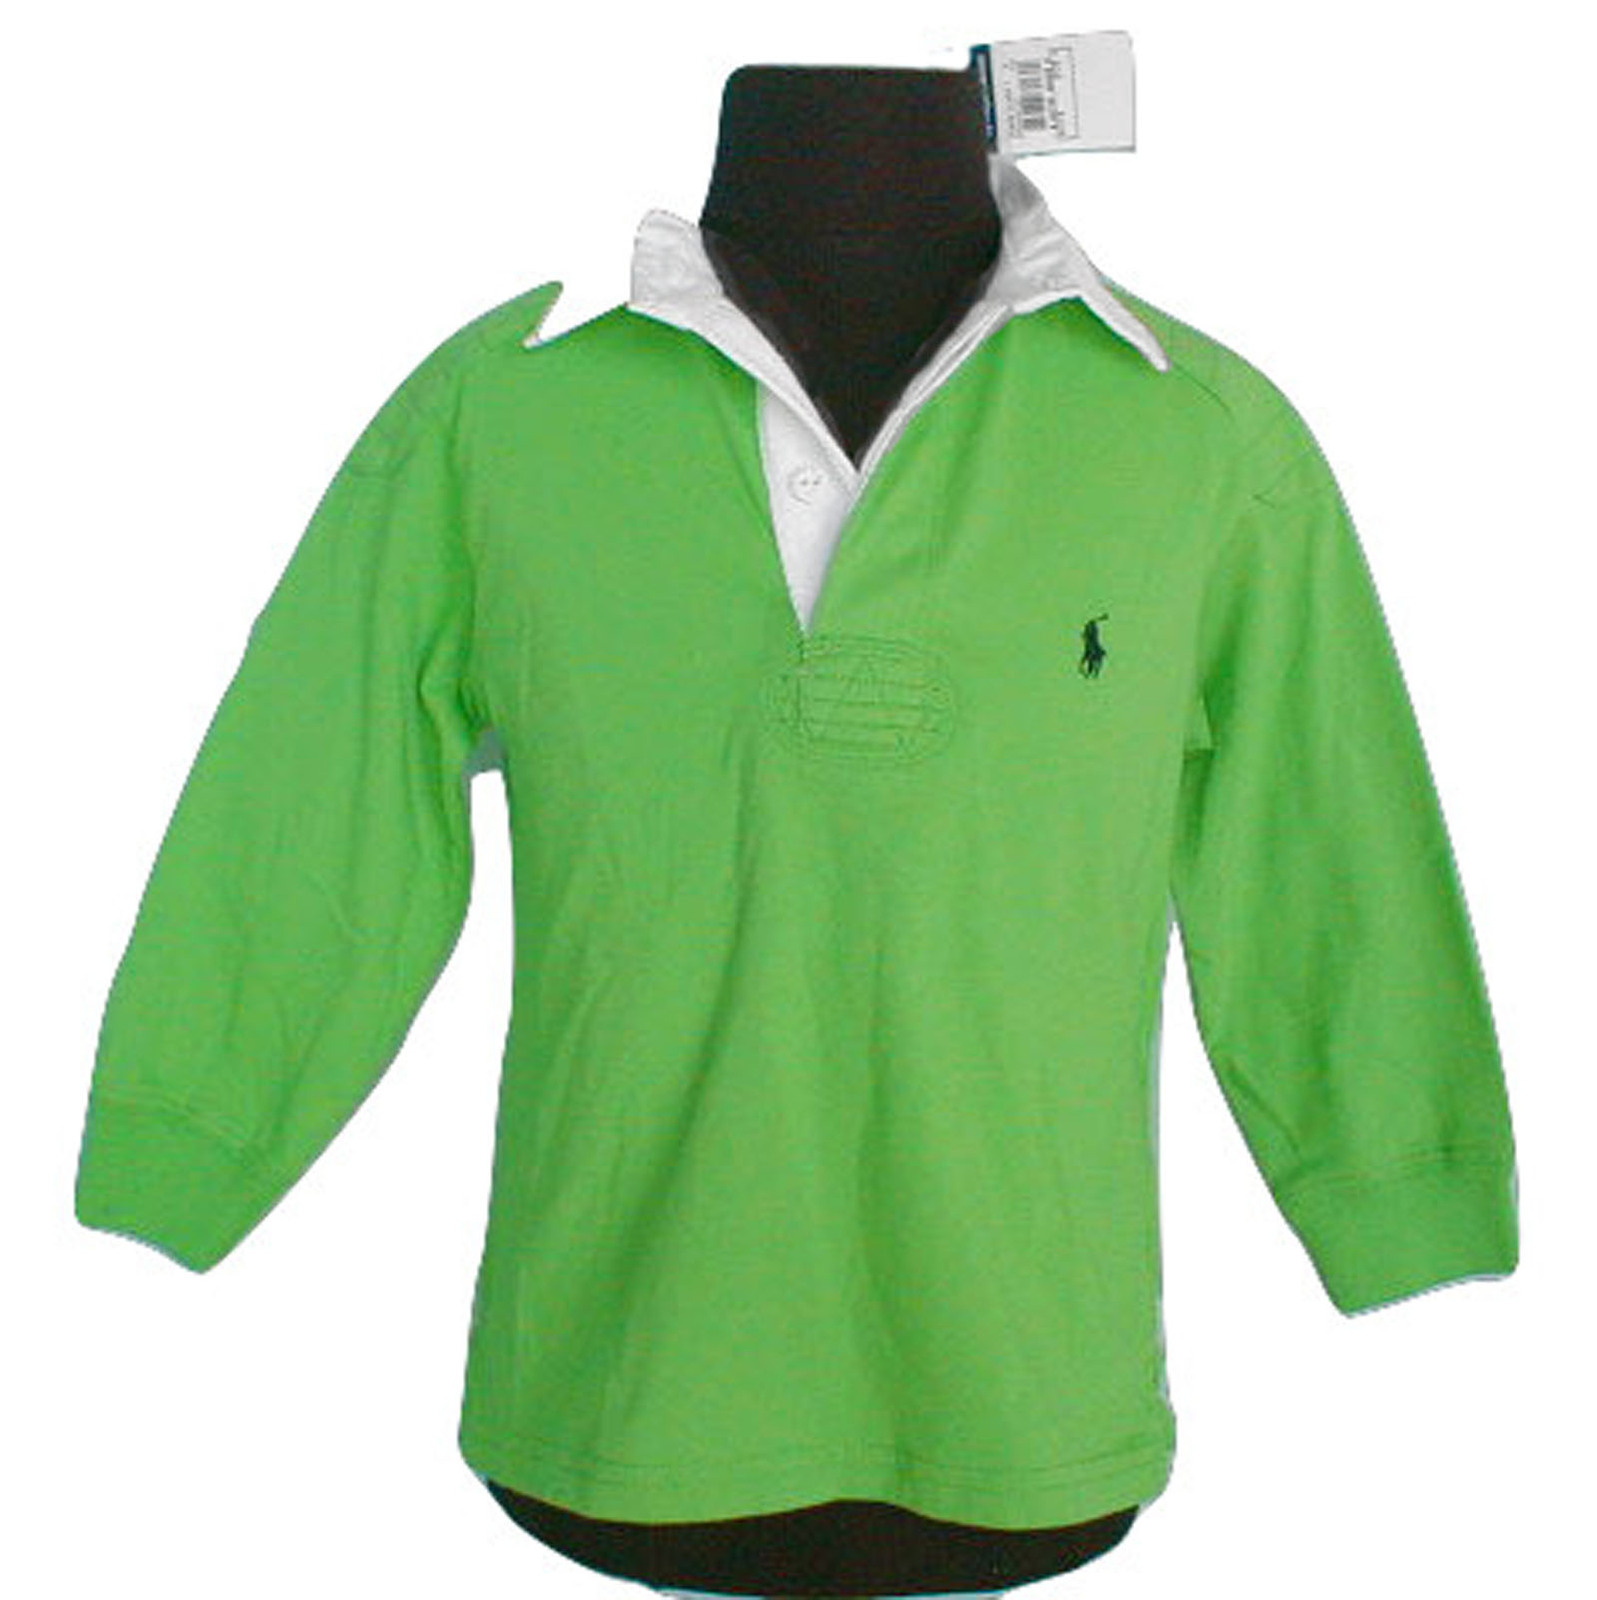 NEW Polo Ralph Lauren Boys Rugby Shirt!  4  *Bright Green with Navy Polo Player* - $32.99